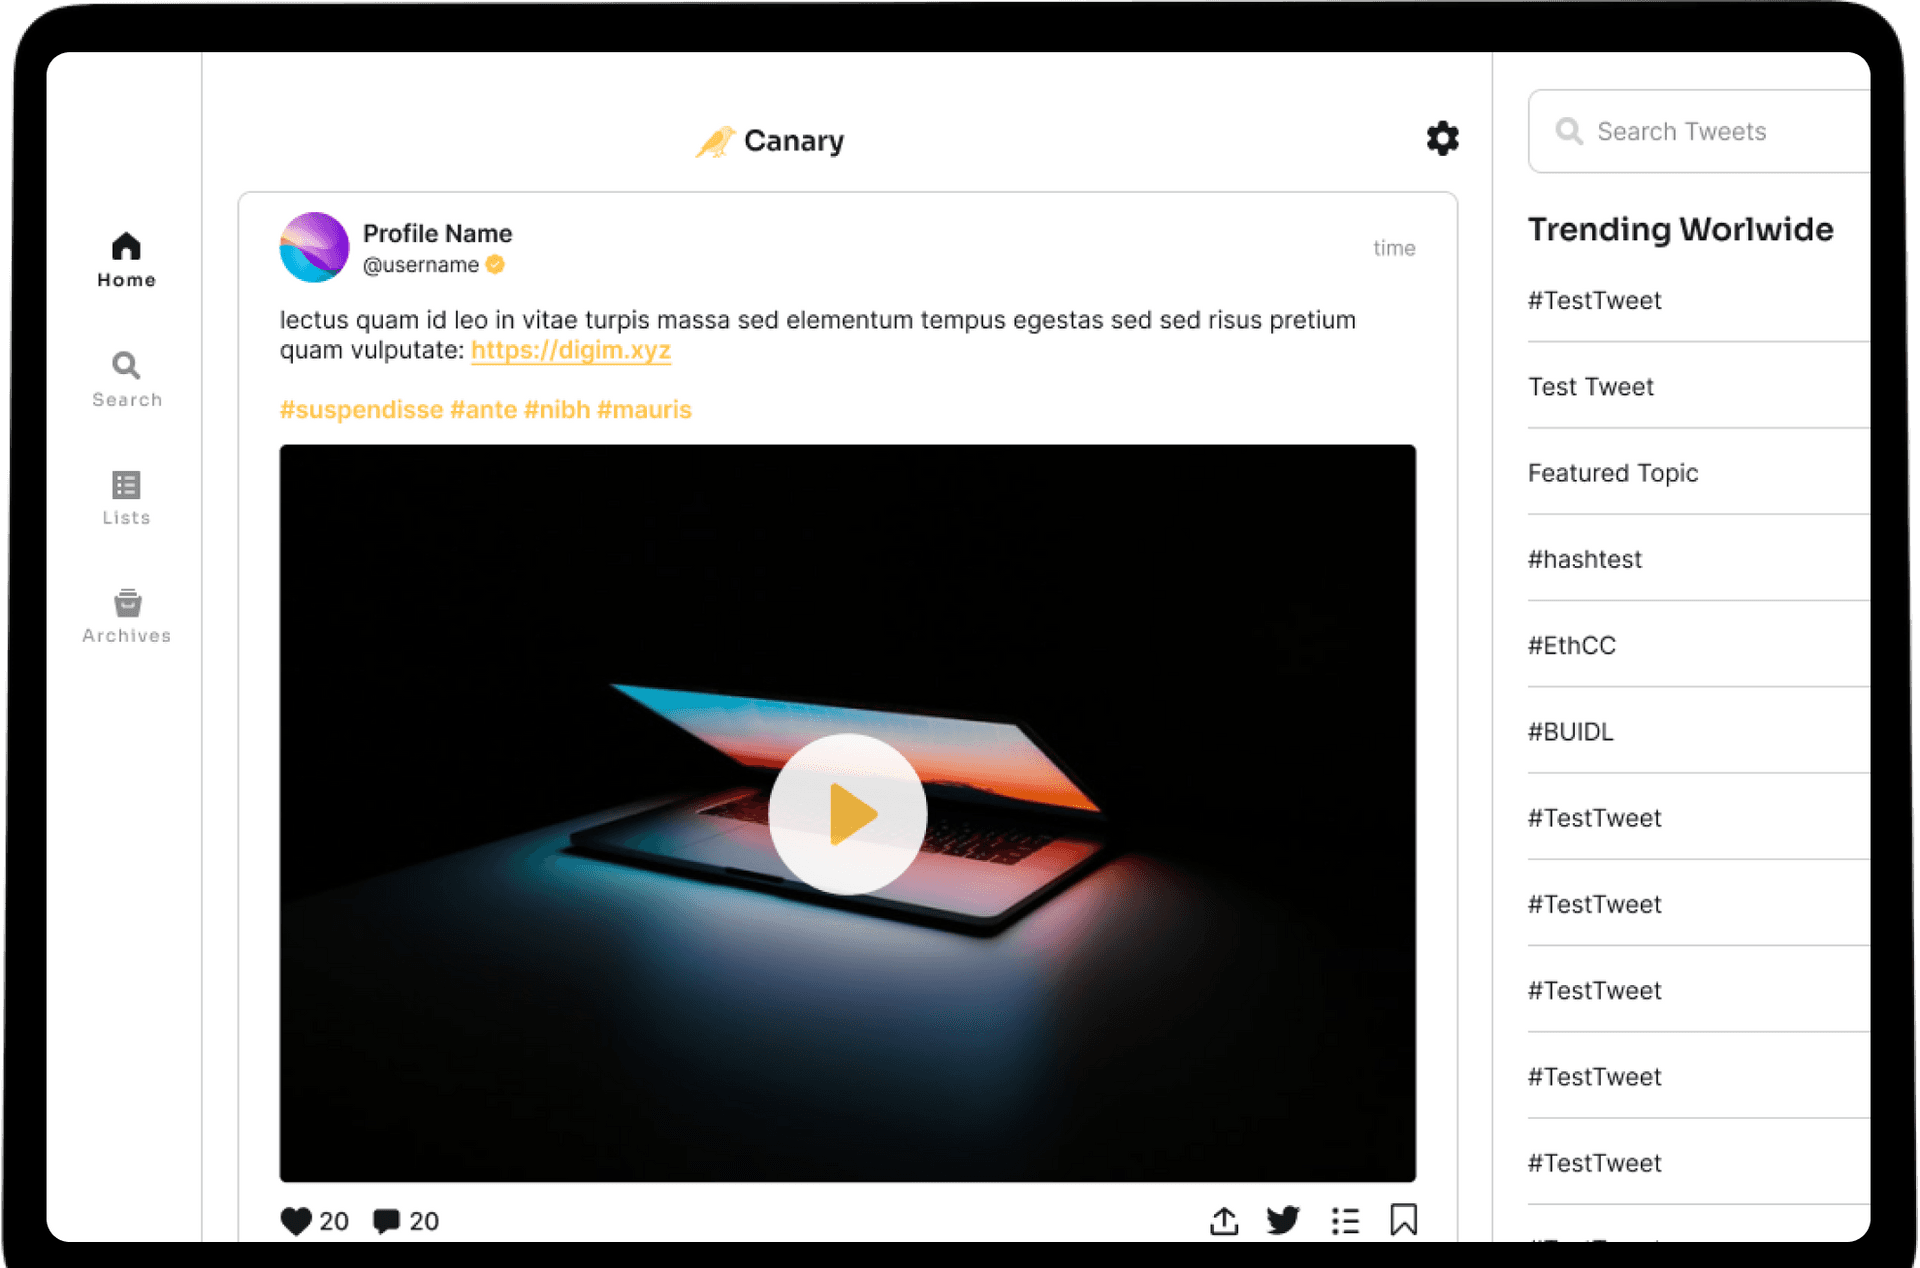 OpenSource Canary - True Sparrow